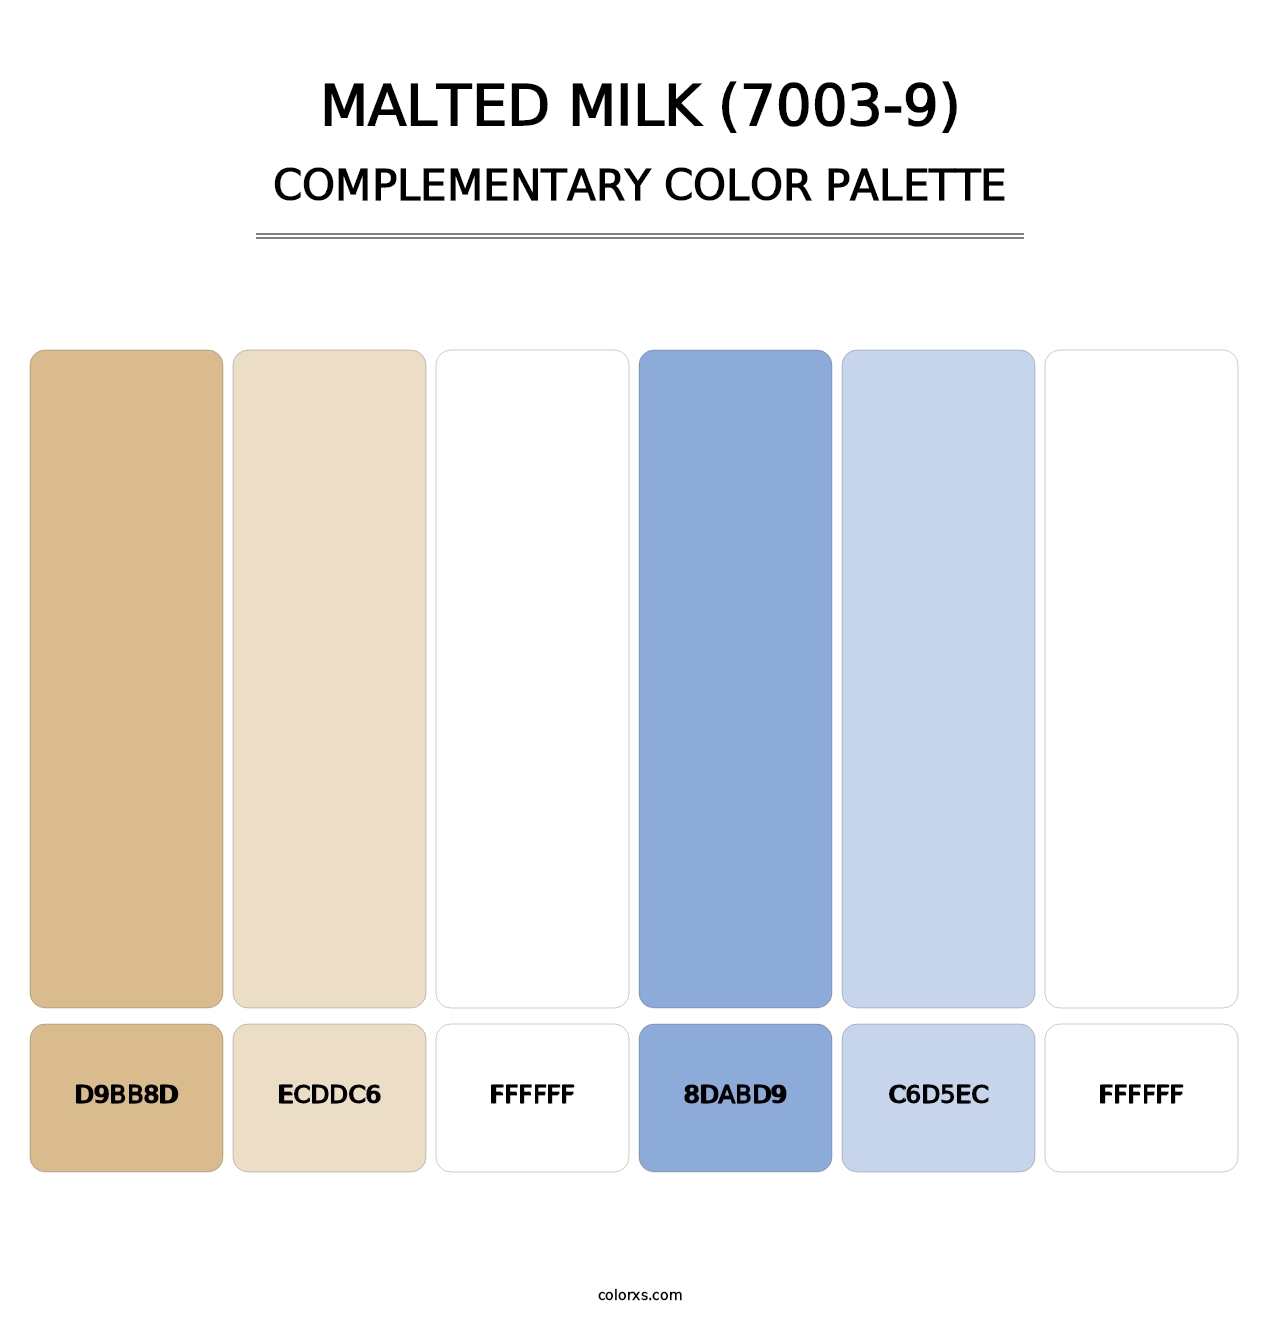 Malted Milk (7003-9) - Complementary Color Palette